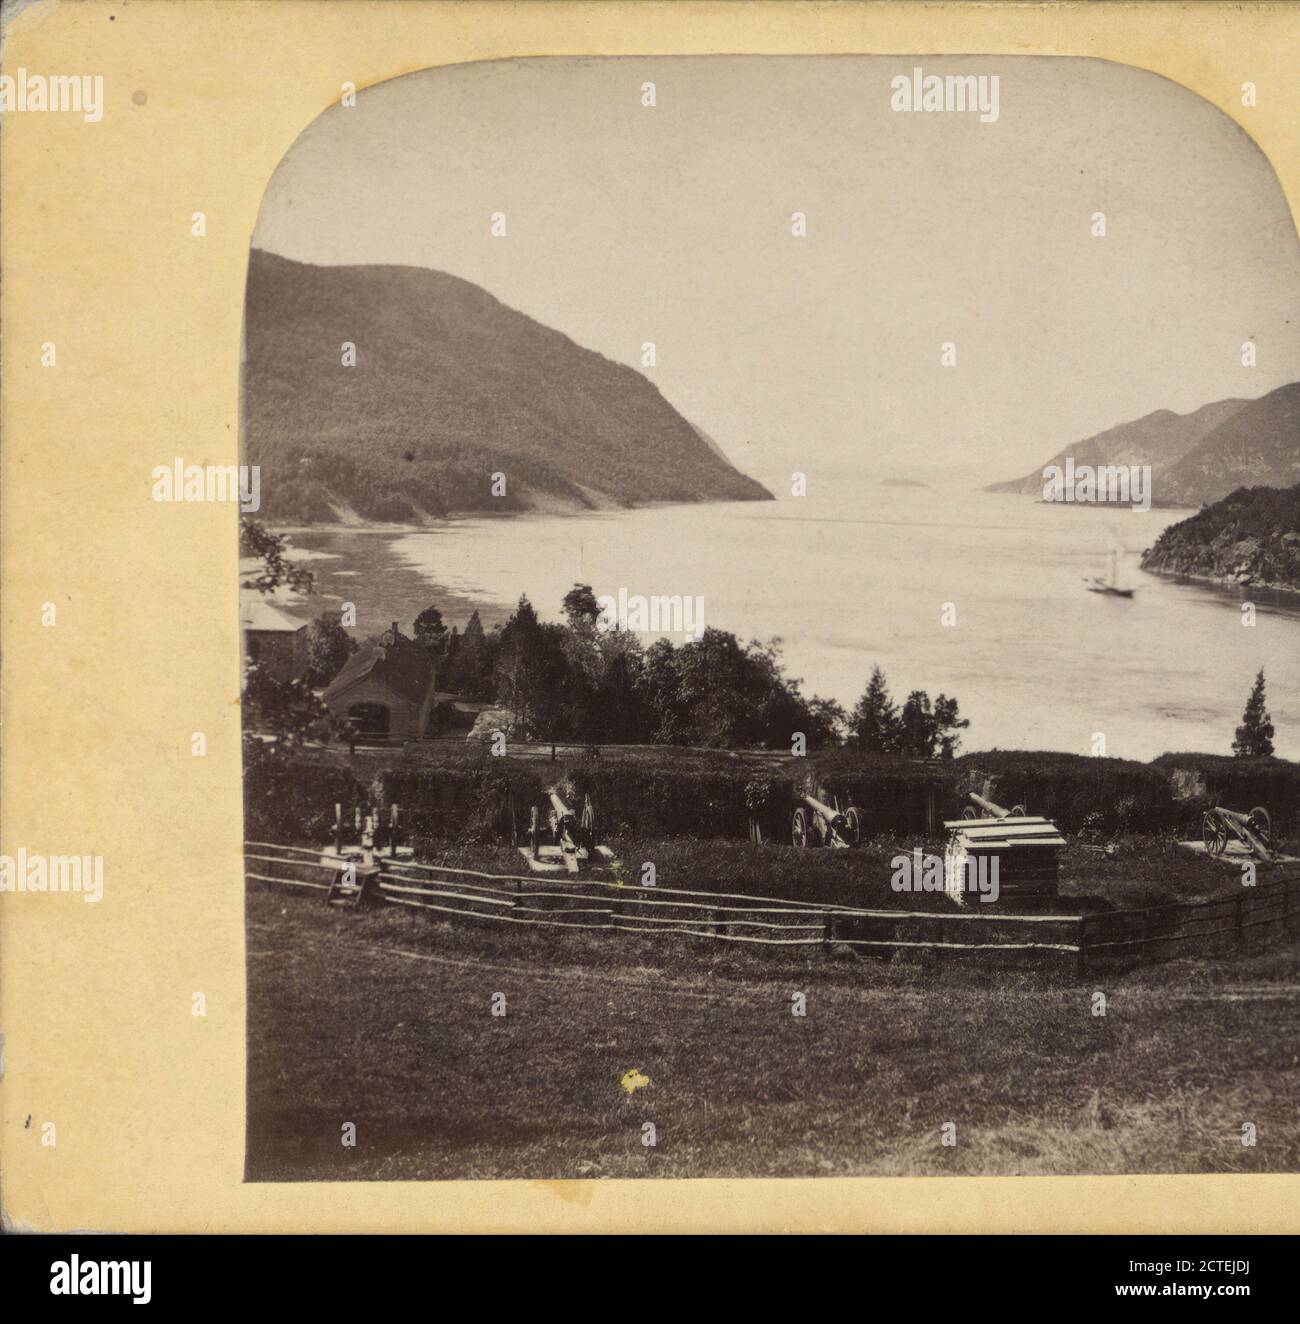 Seige Battery, West Point., Barnum, Deloss, United States Military Academy, ca. 1855-ca. 1930, Batteries (Weaponry), New York (State), Hudson River Valley (N.Y. and N.J.), West Point (N.Y.), Hudson Highlands (N.Y Stock Photo